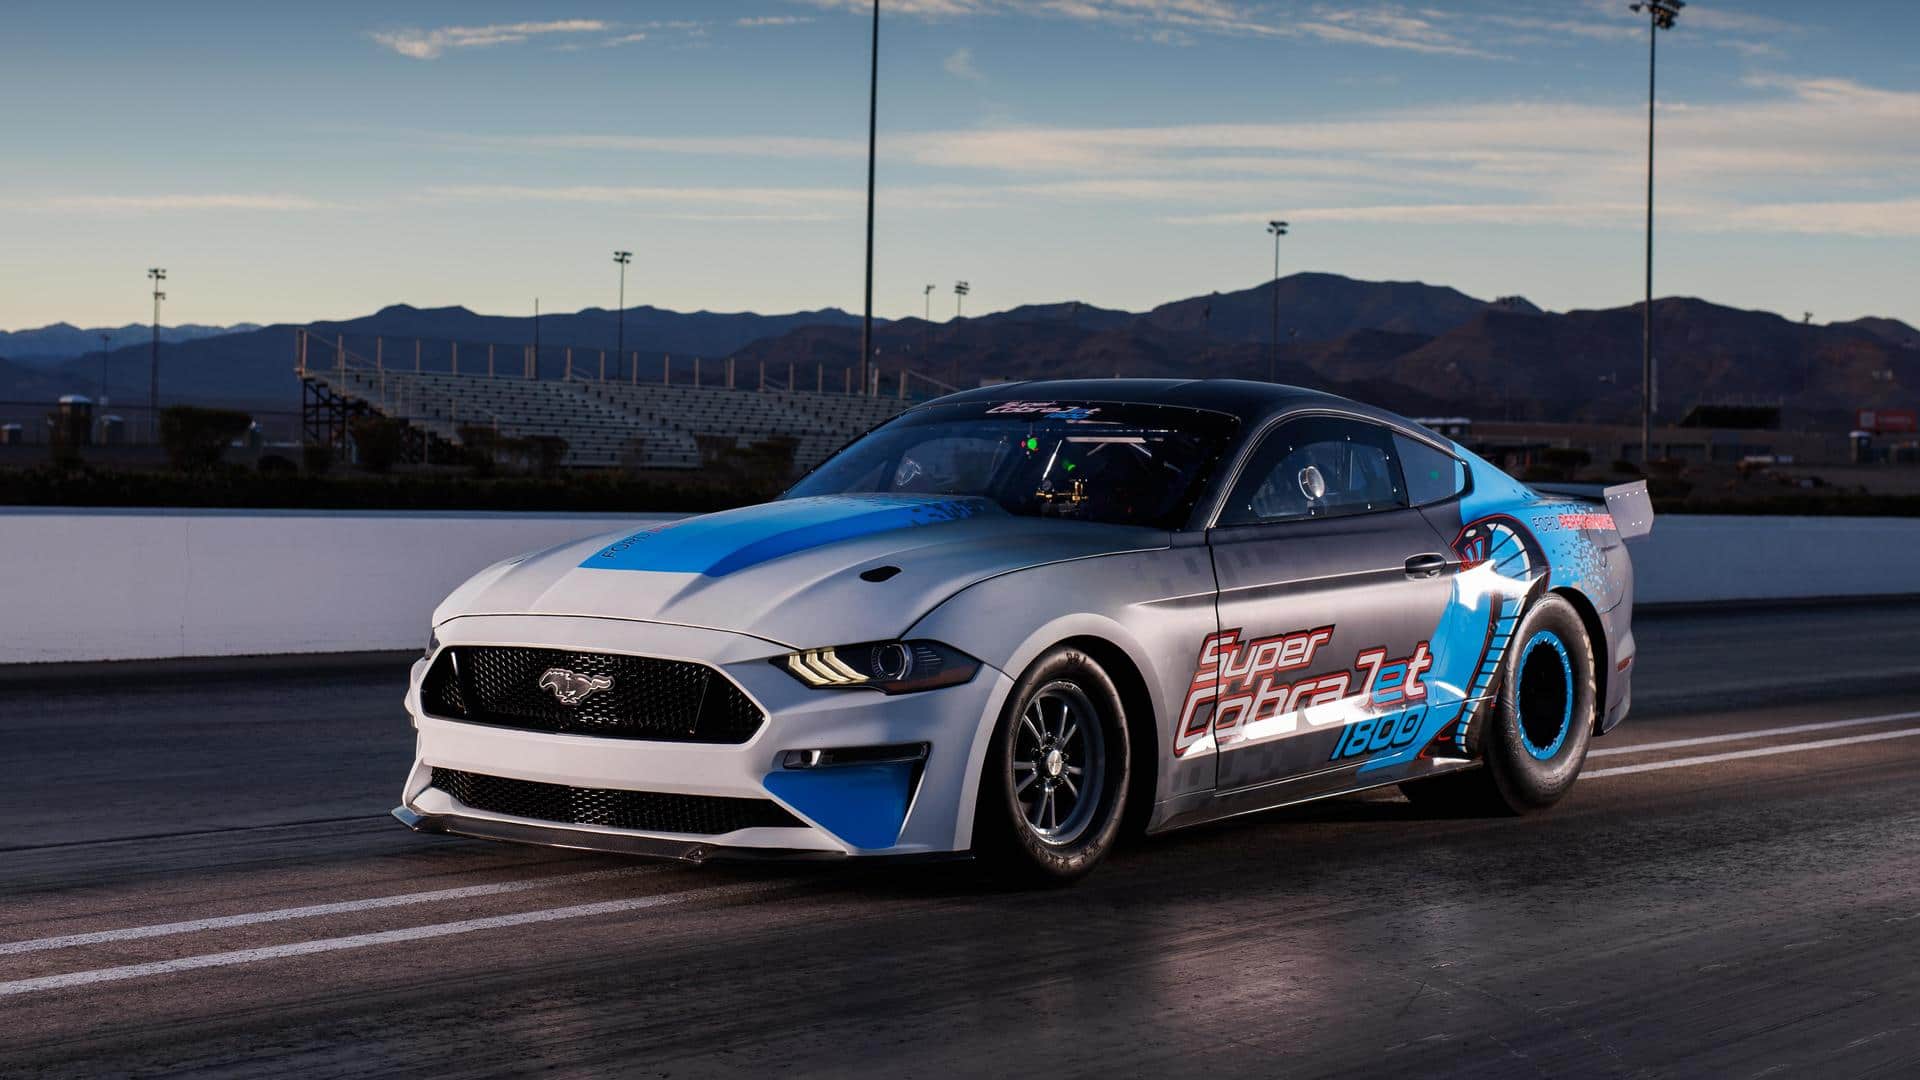 Ford unveils 1,800hp all-electric Mustang 'Jet' to beat world records